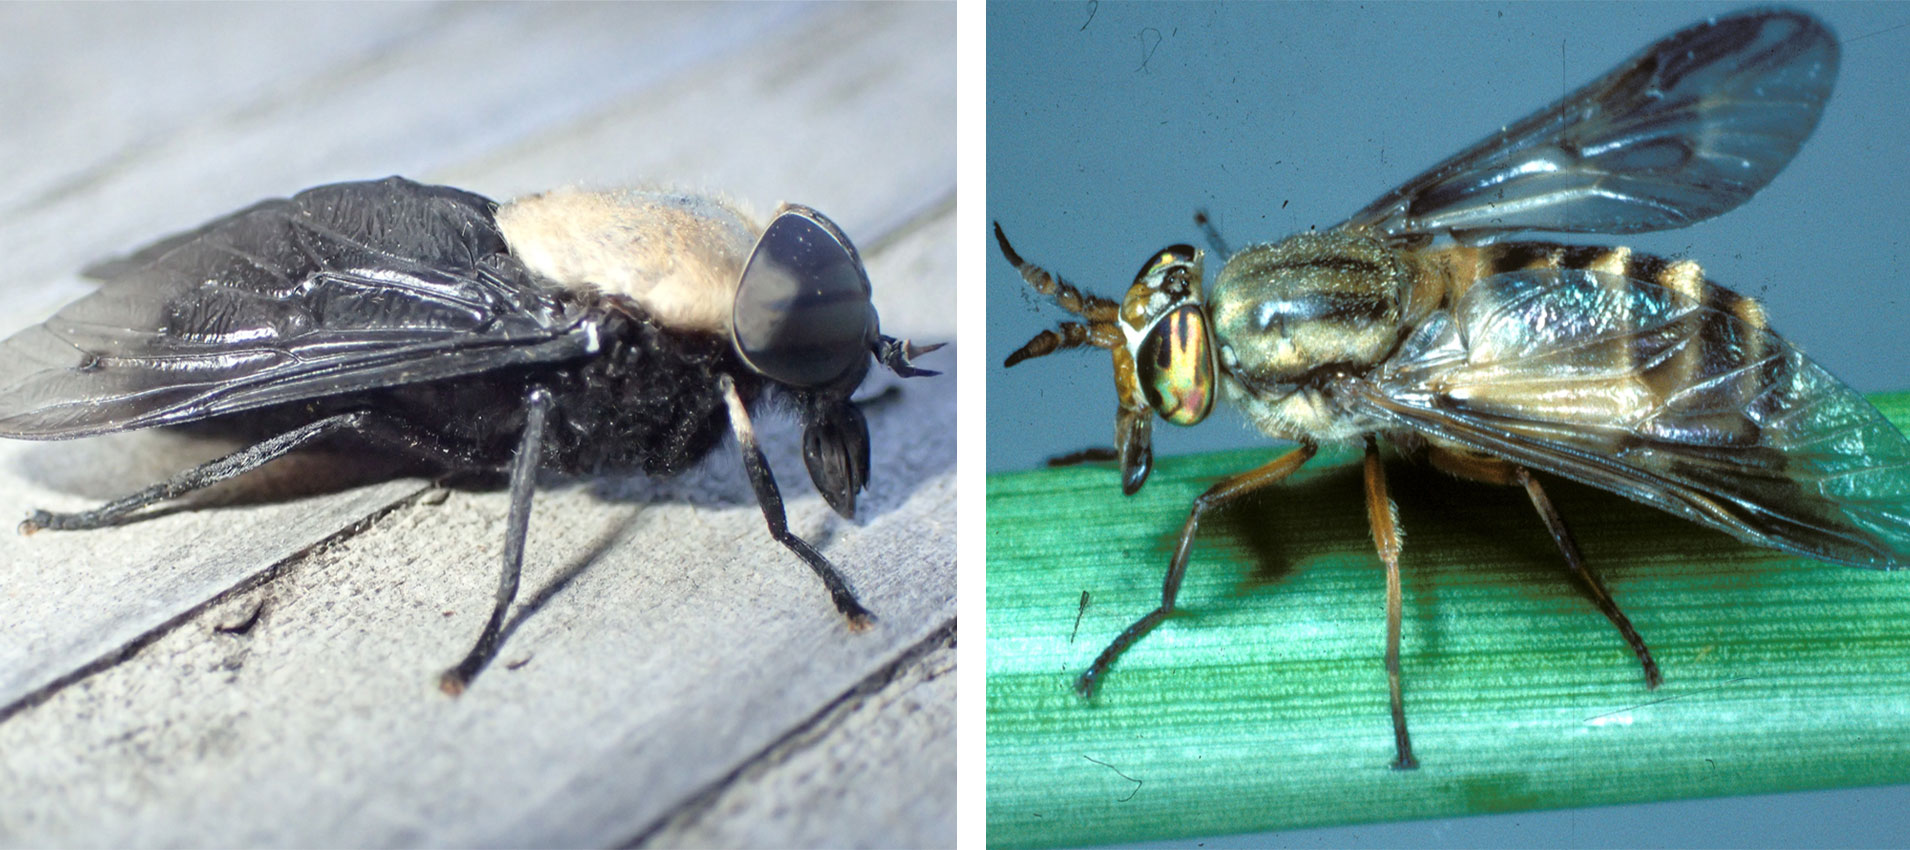 Two flies side-by-side. The left fly is a Western horse fly. The right fly is a deer fly.